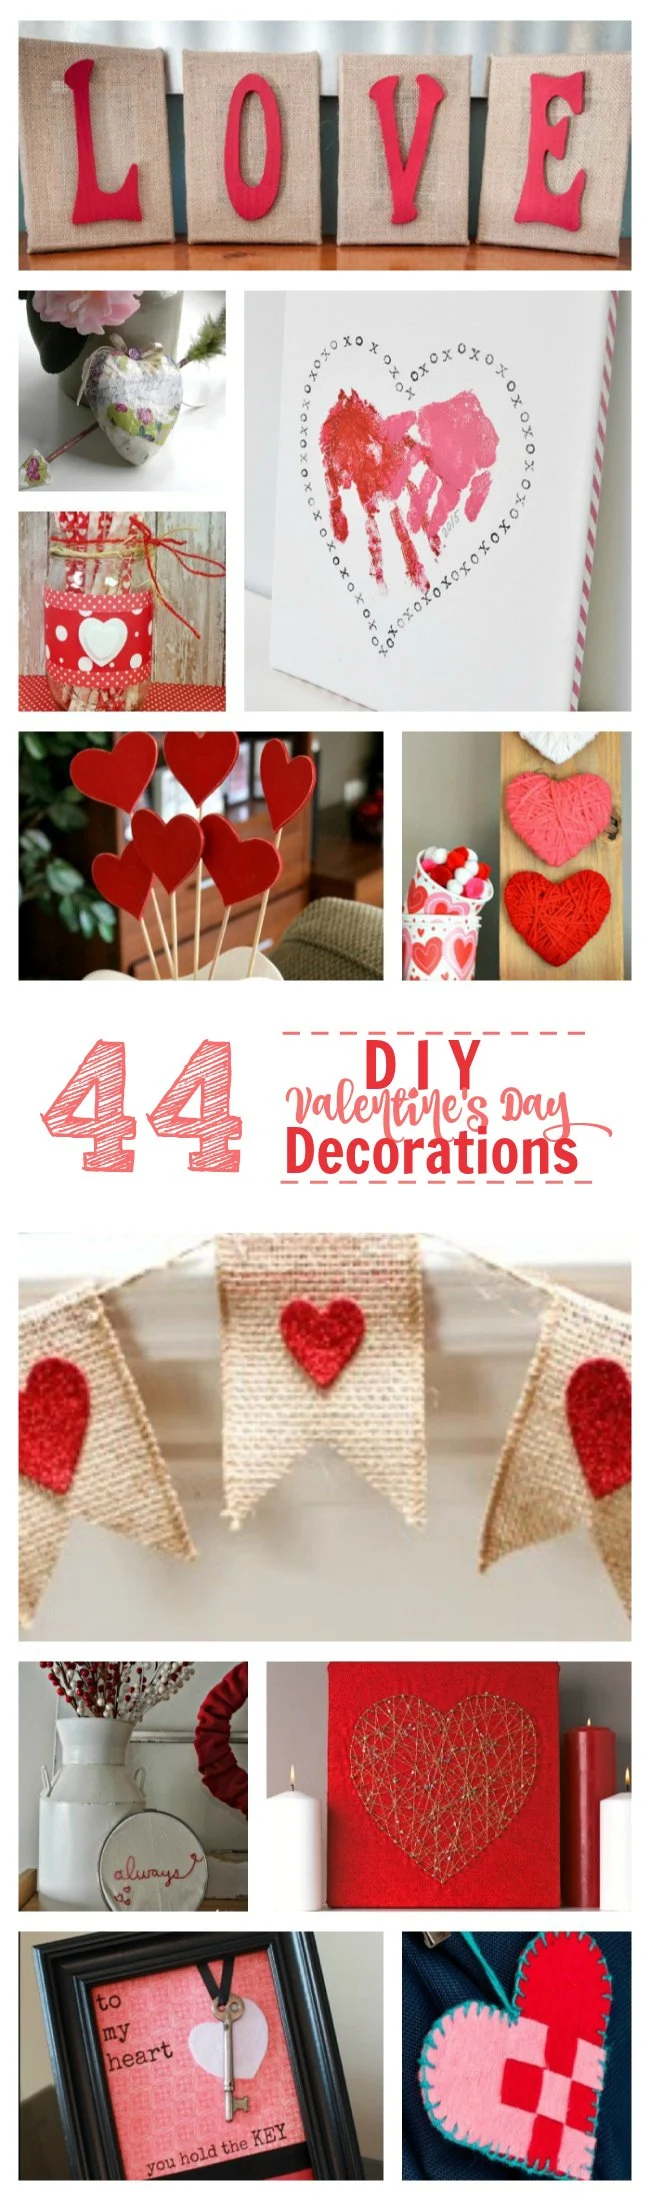 Totally heart Valentine's Day? Click the image to make your home festive with these 44 DIY Decorations.